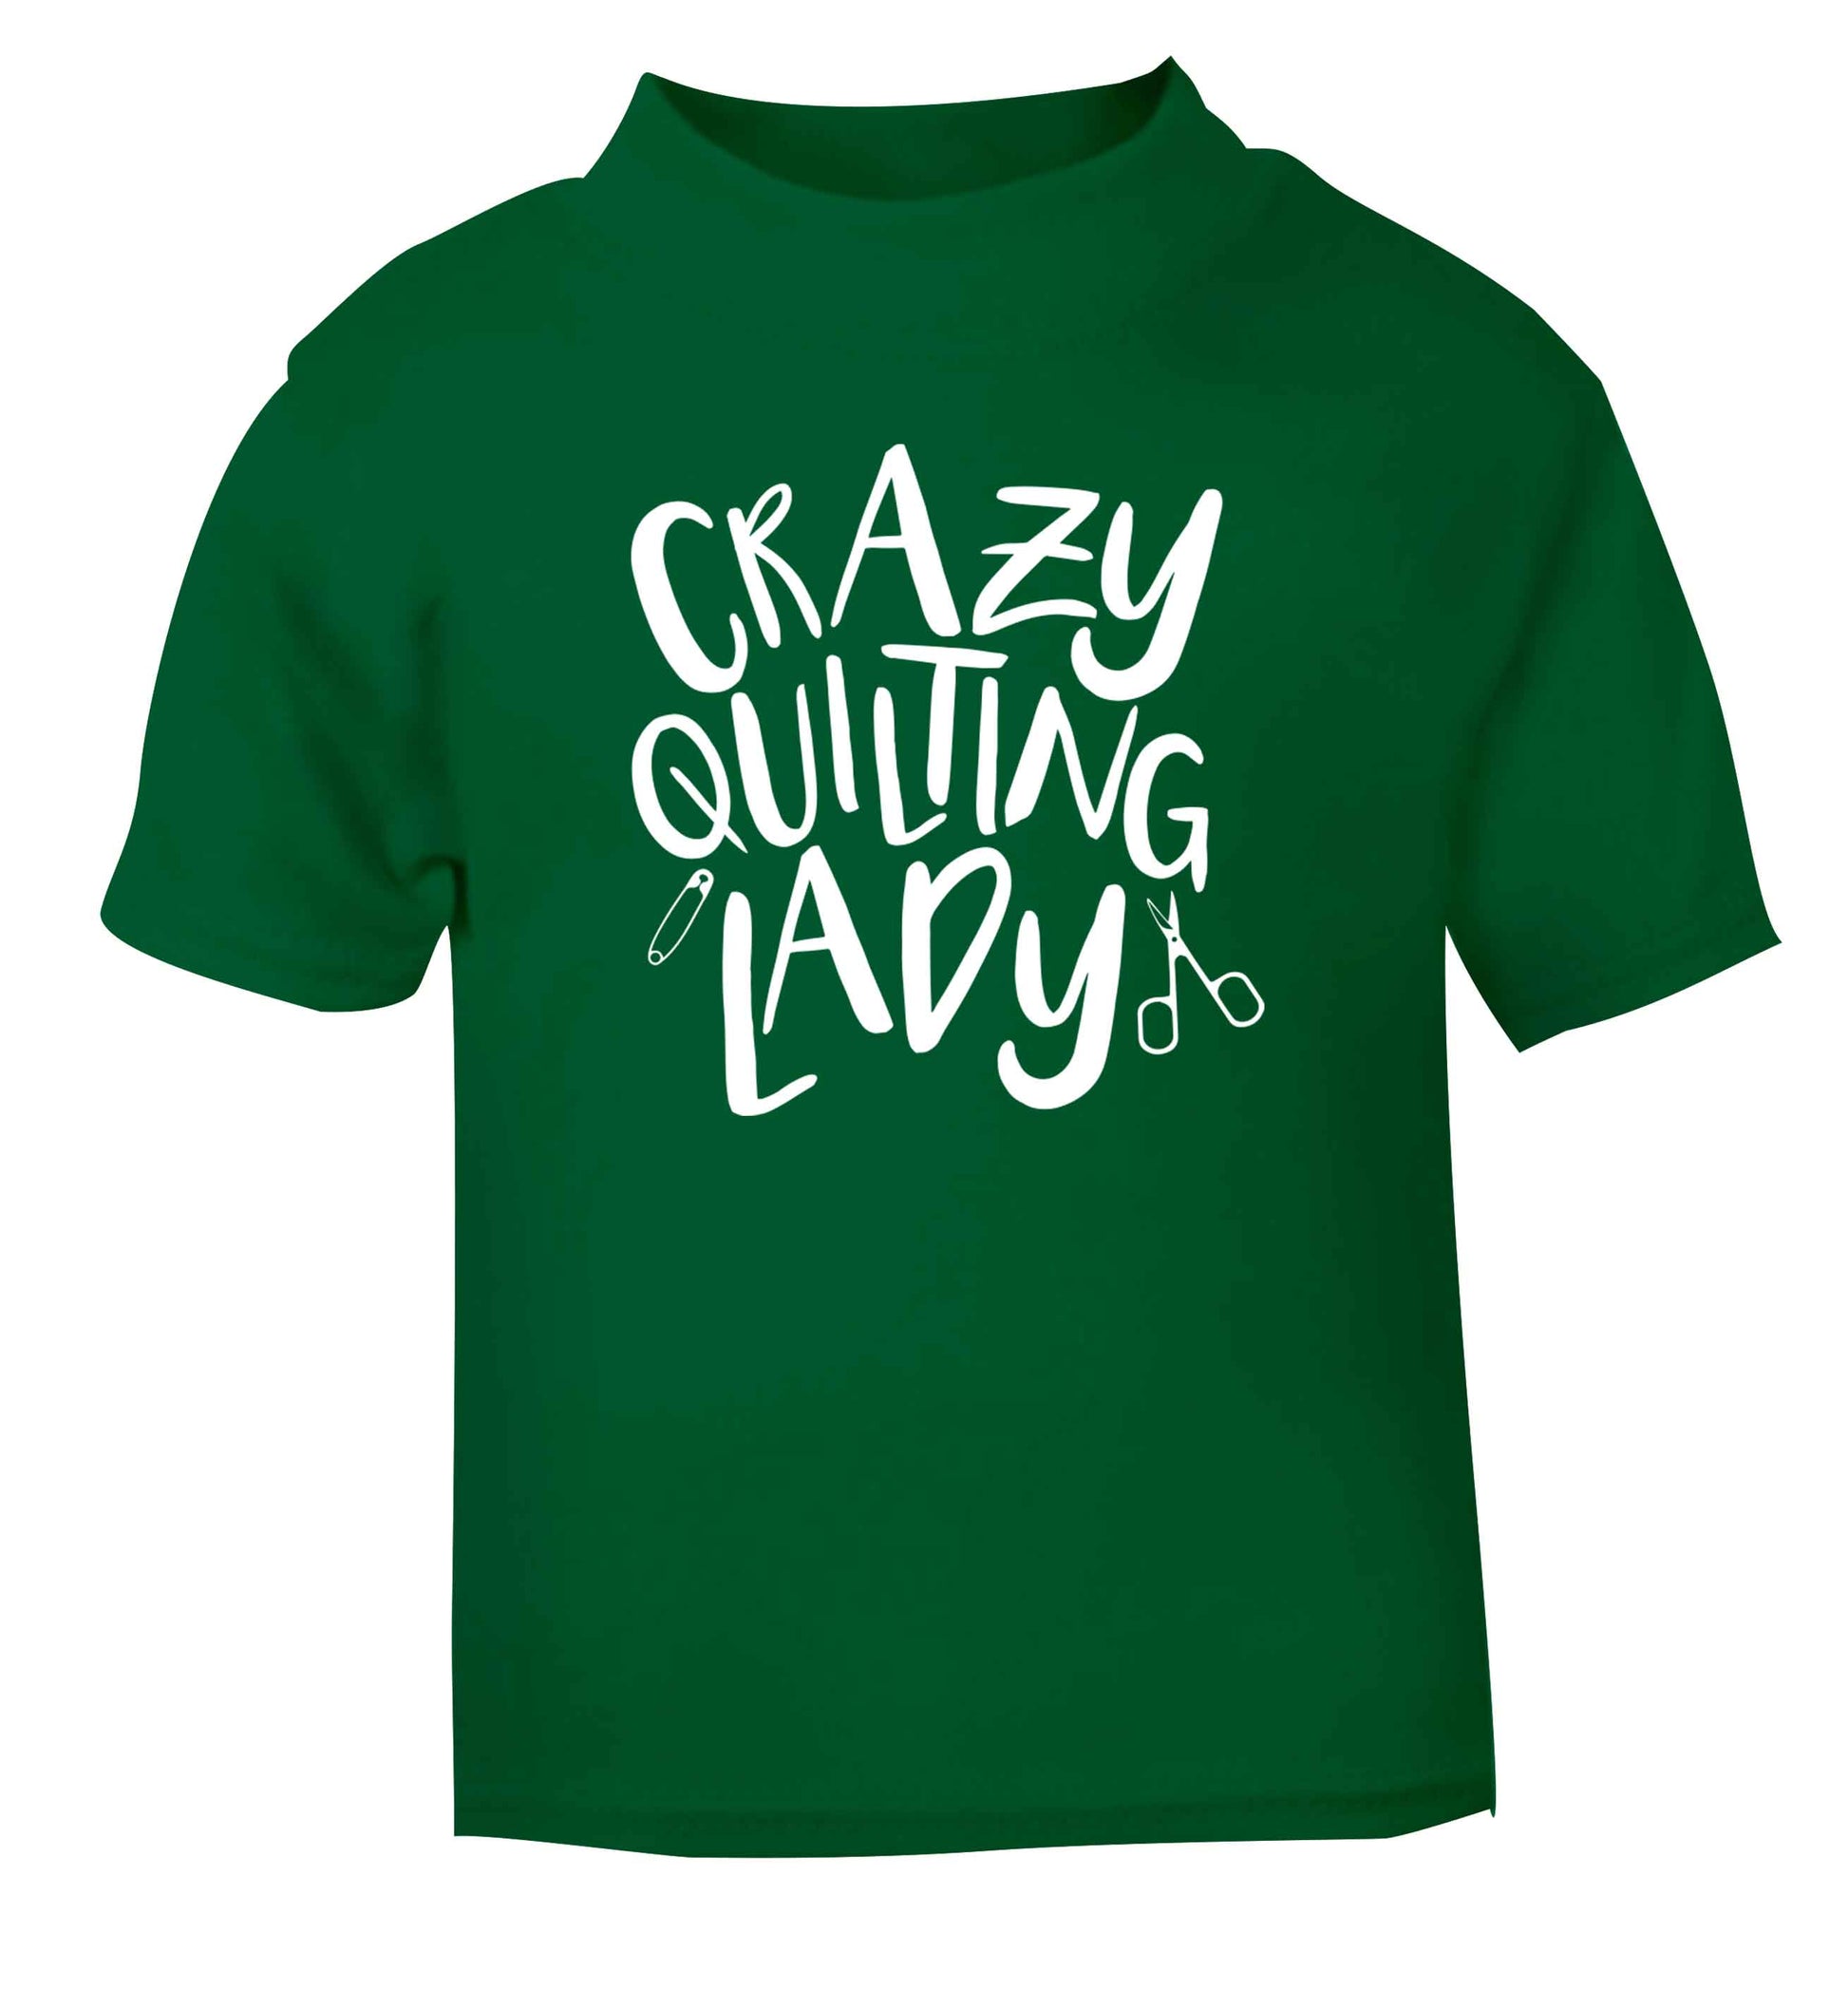 Crazy quilting lady green Baby Toddler Tshirt 2 Years